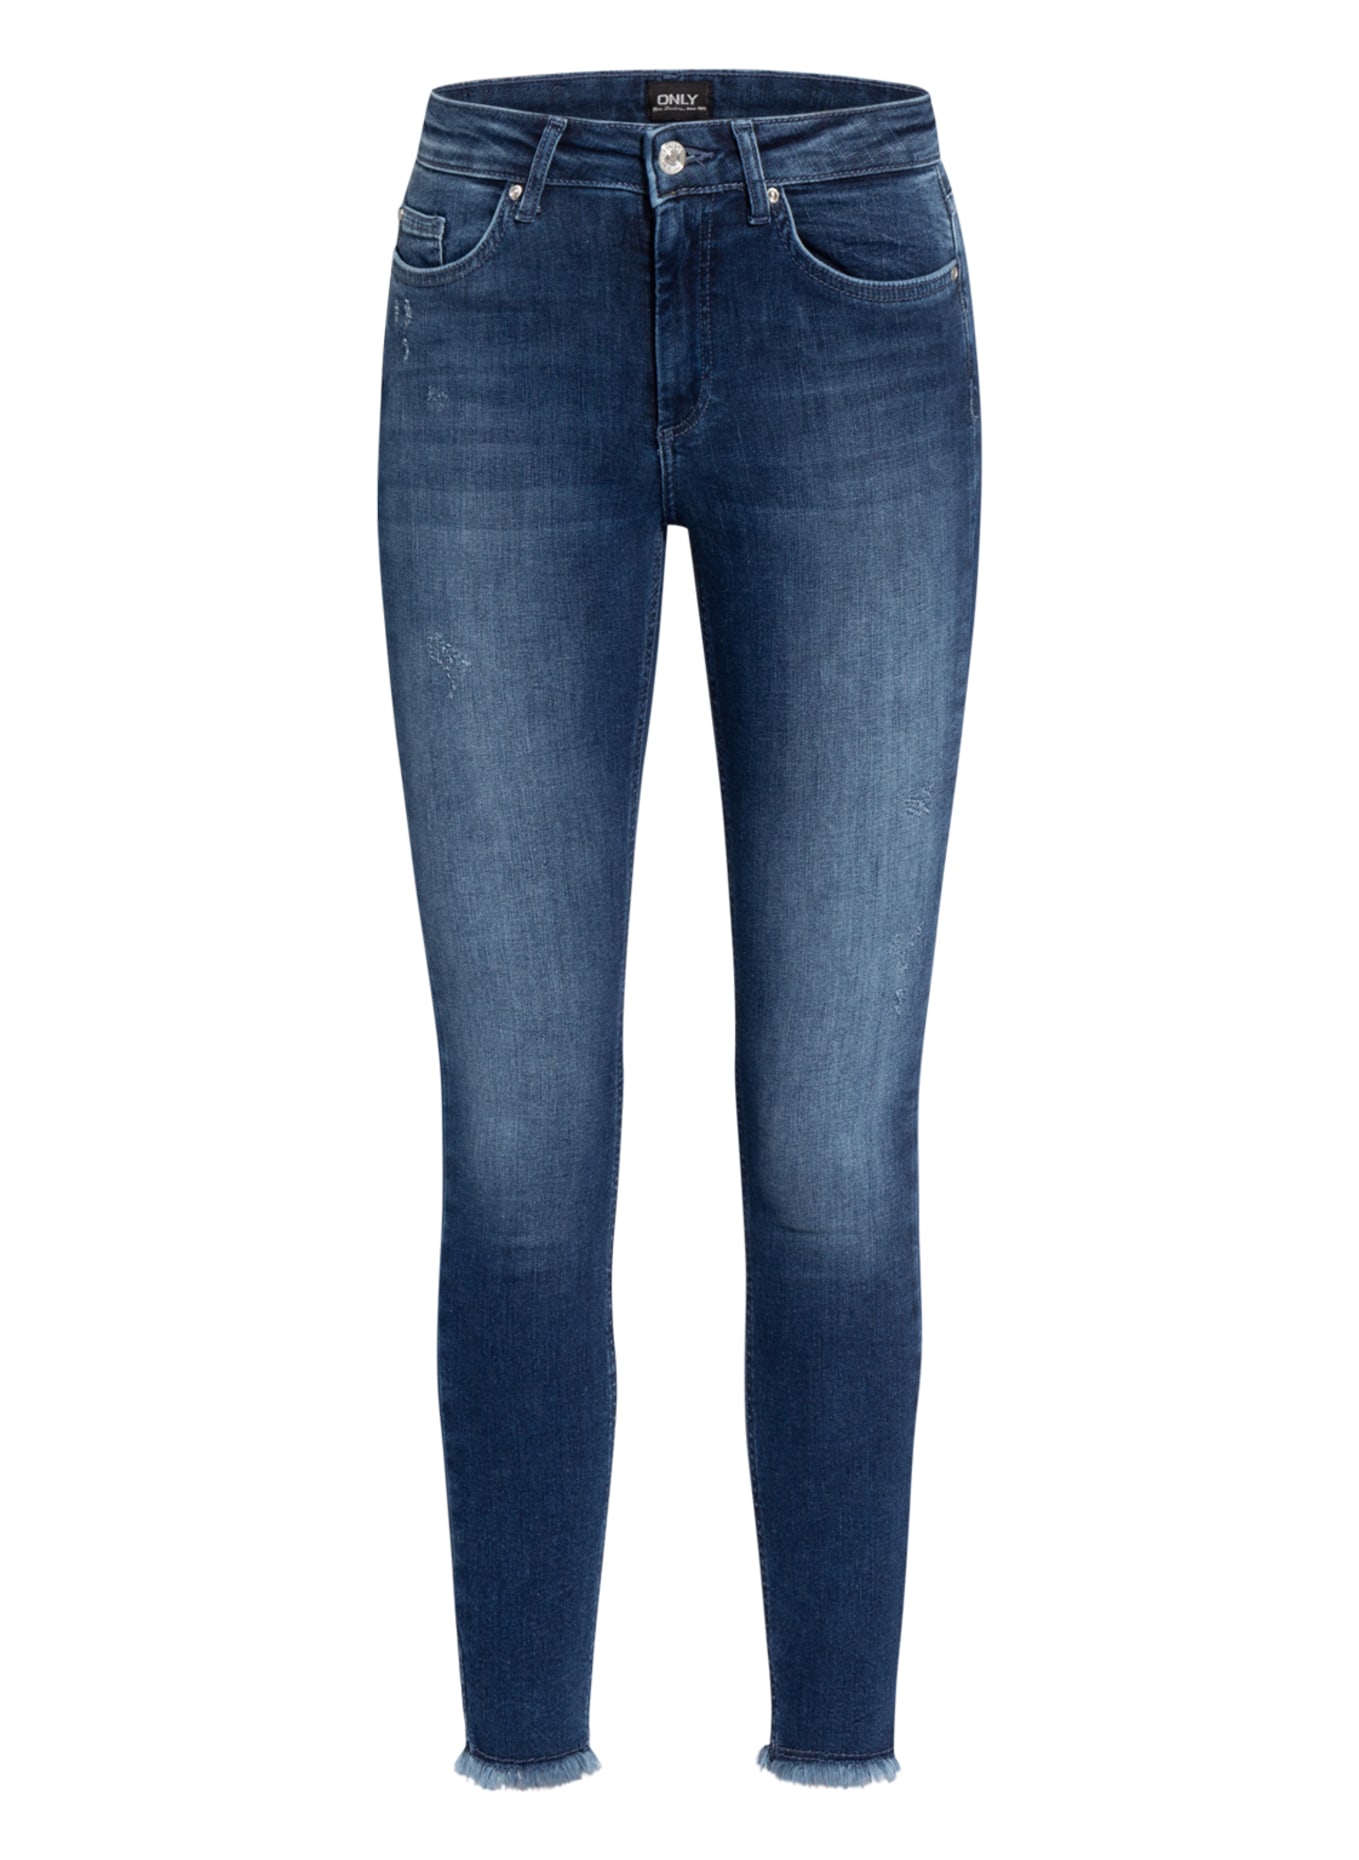 Buy ONLY Blue Denim Cotton Straight Fit Women's Jeans | Shoppers Stop